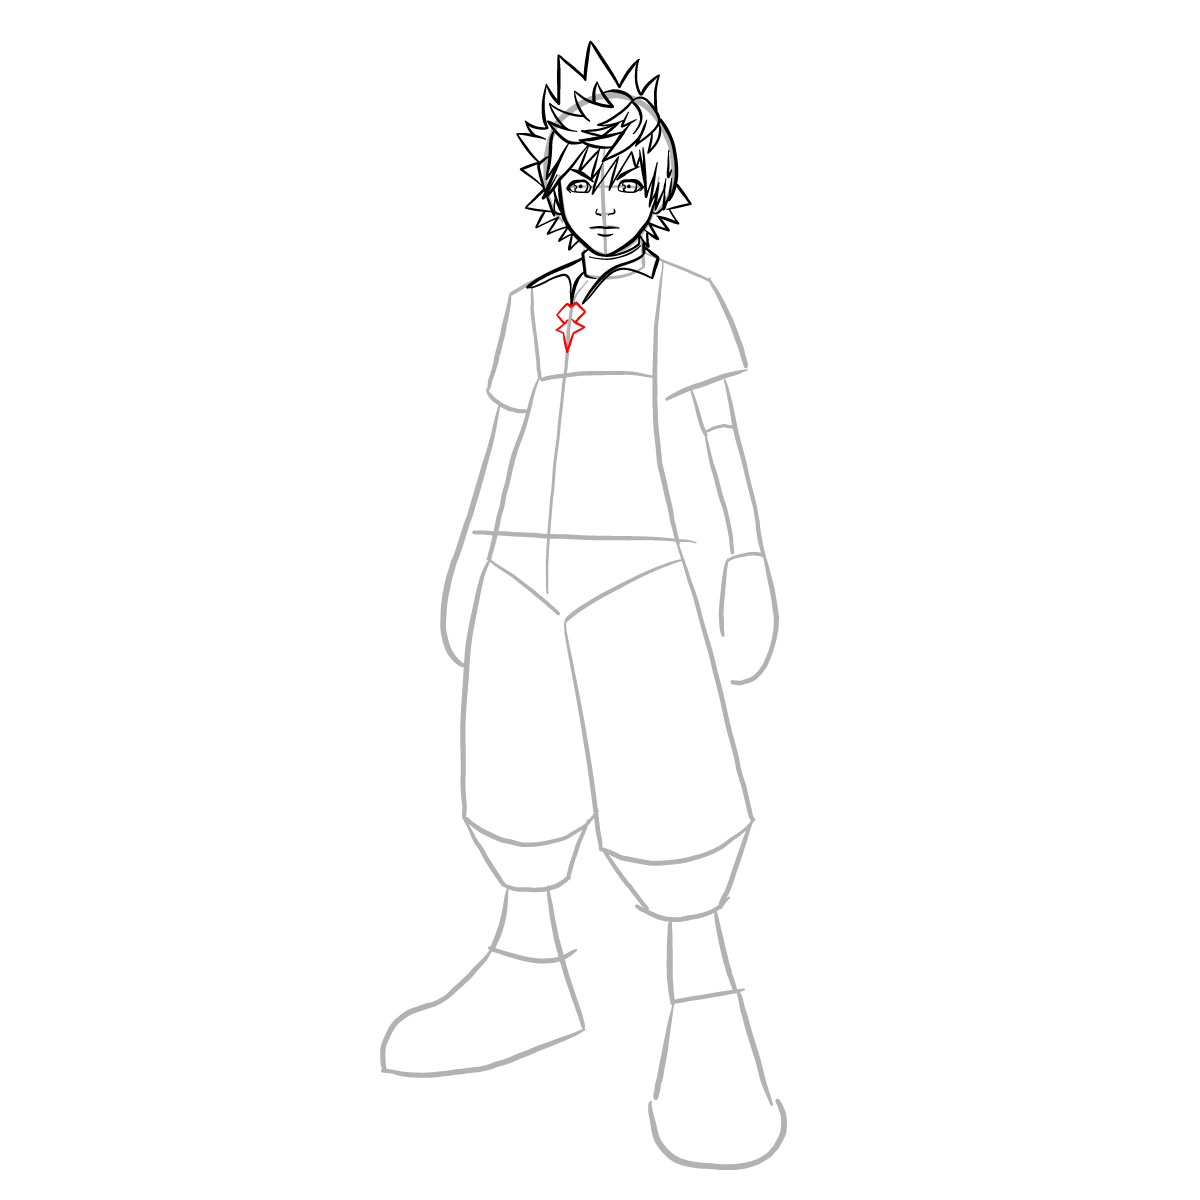 How to draw Ventus - step 19